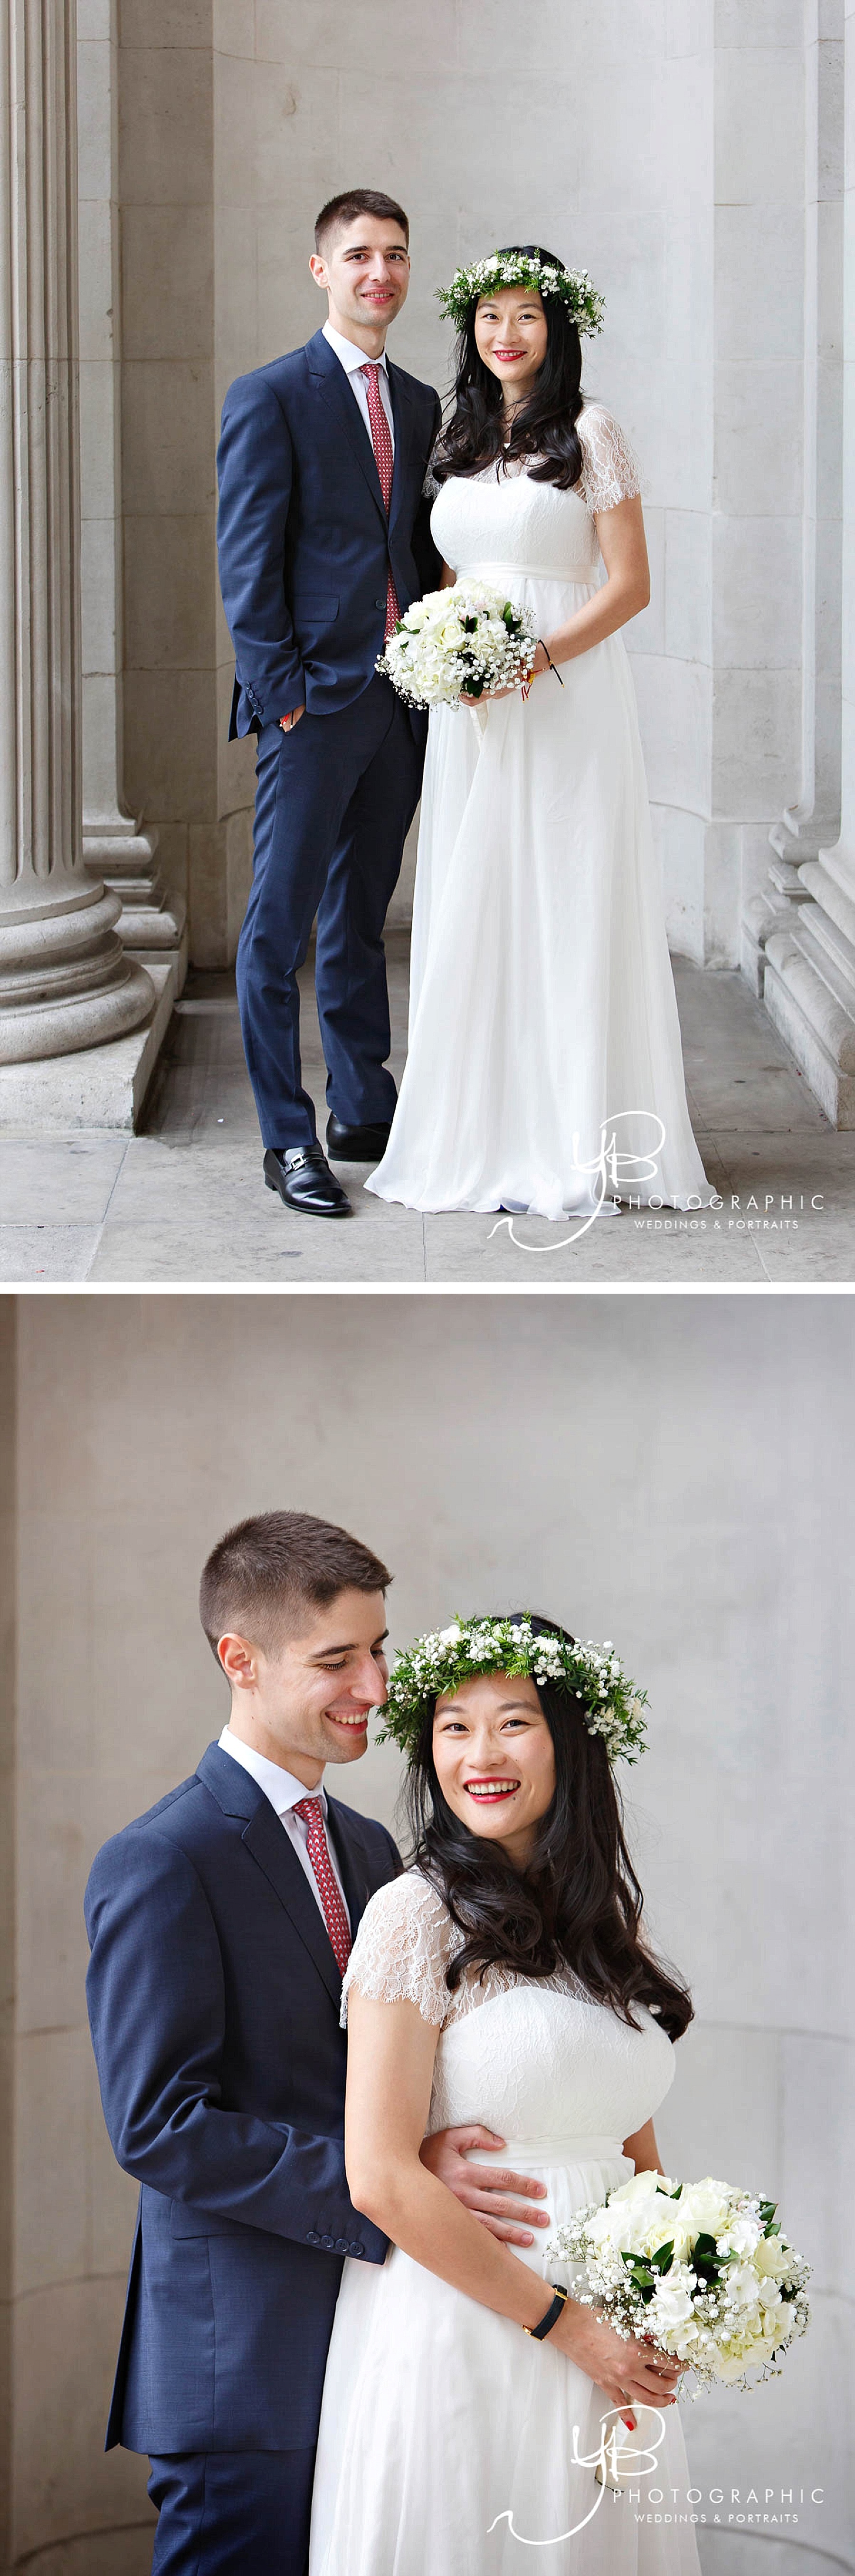 Wedding Portraits at the Old Marylebone Town Hall by YBPHOTOGRAPHIC